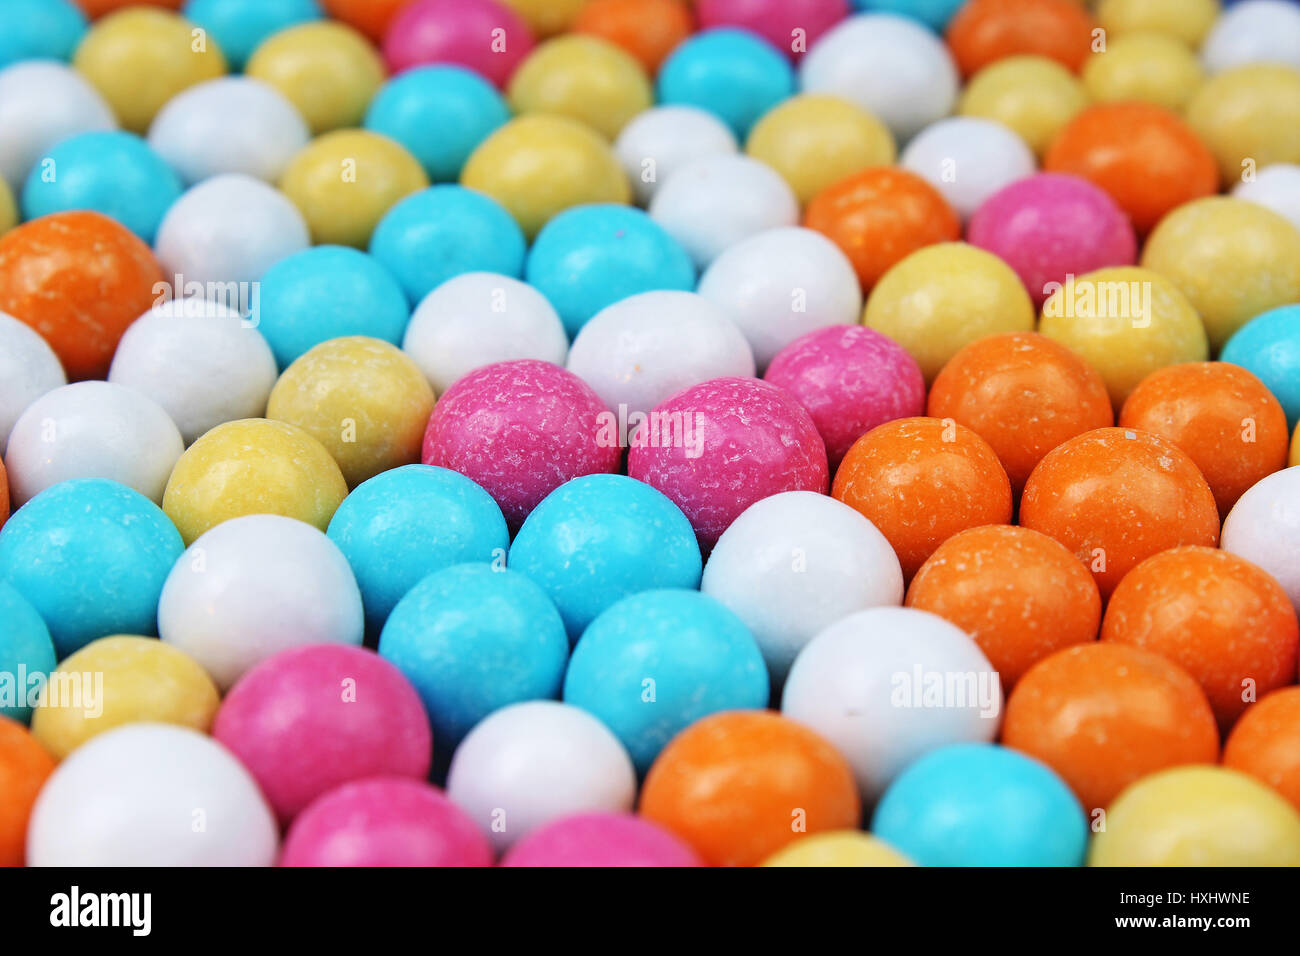 Bubble gum chewing gum texture. Rainbow multicolored gumballs chewing gums as background. Round sugar coated candy dragee bubblegum texture Stock Photo